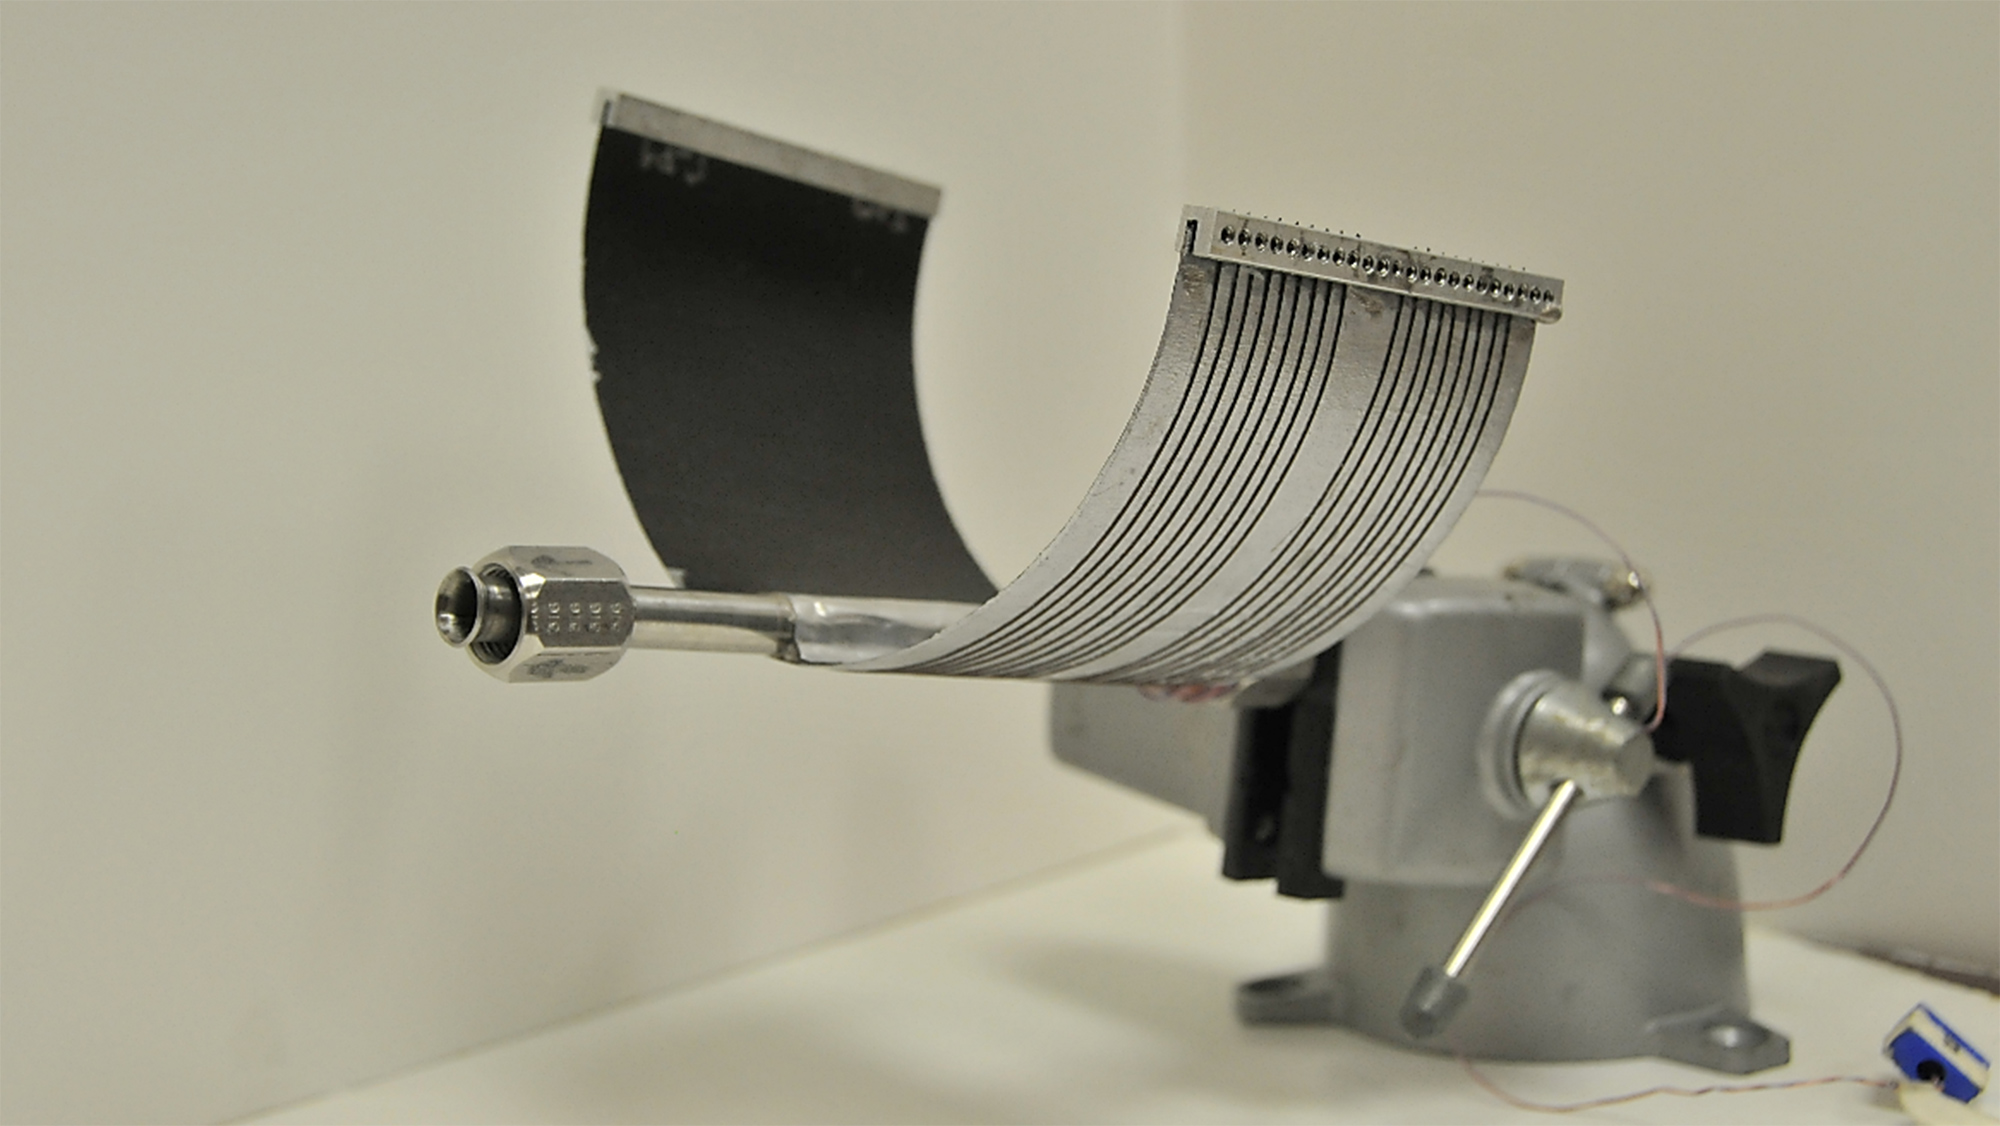 A prototype of the adaptable lunar radiator.